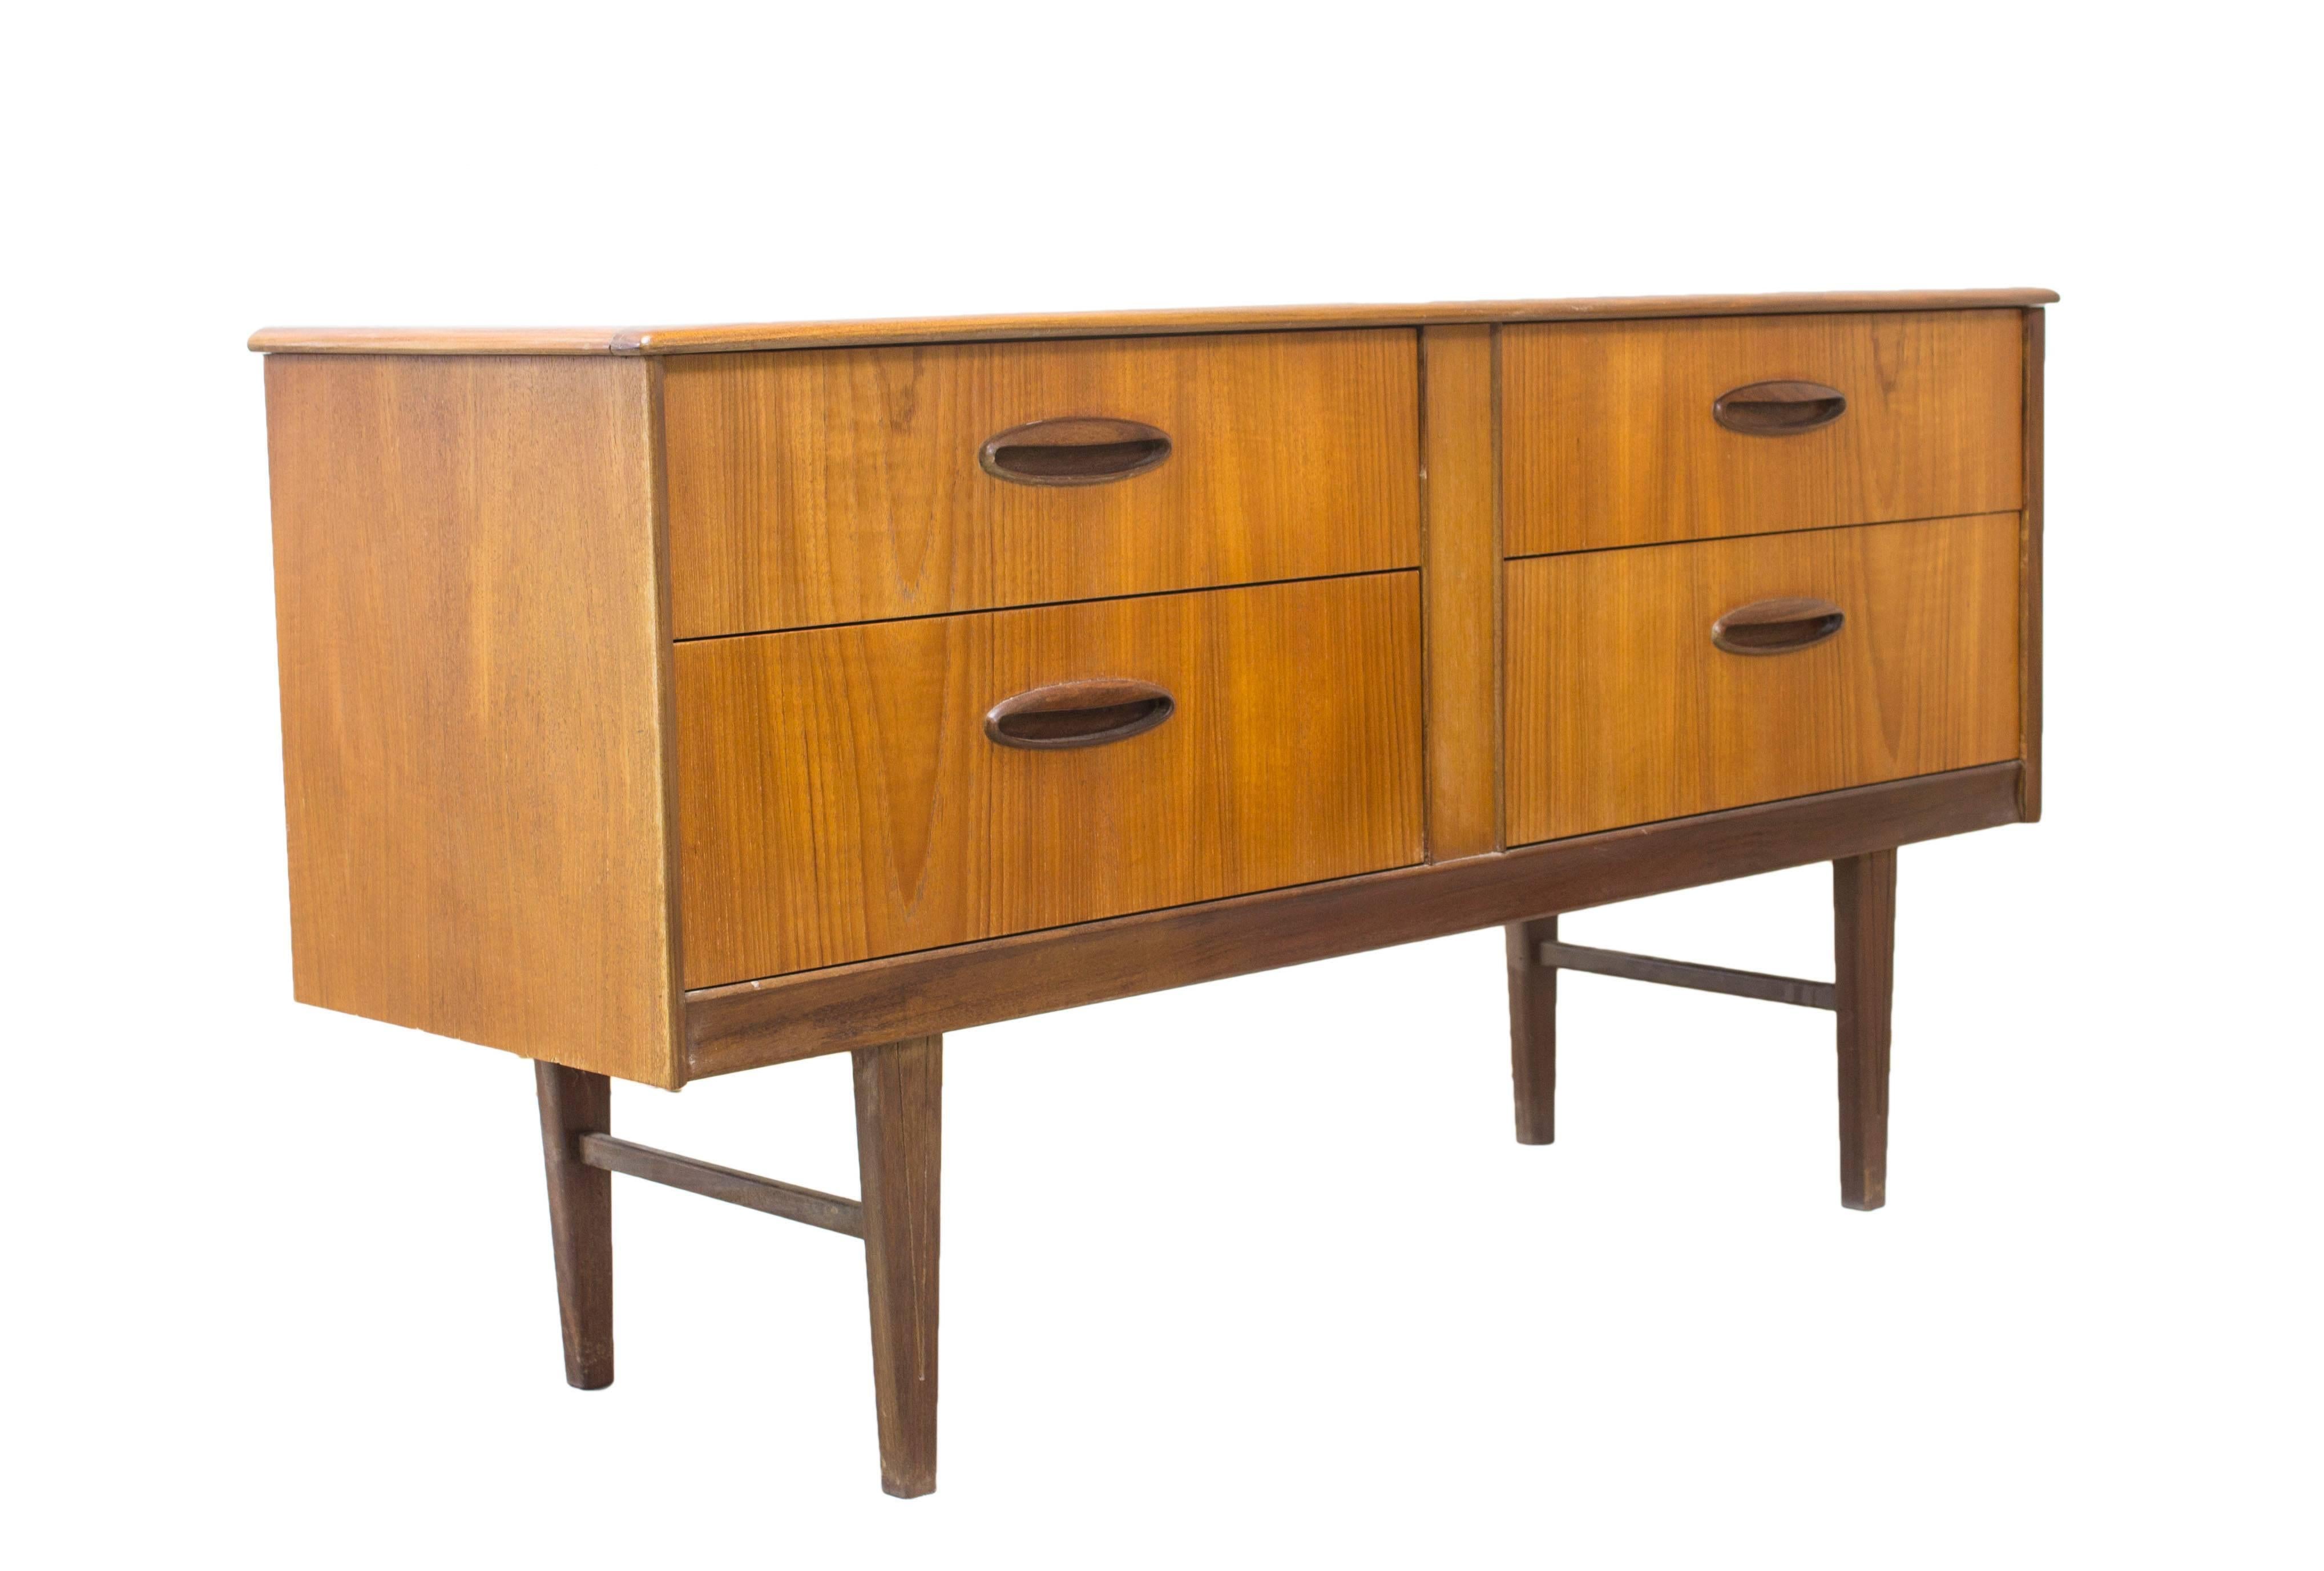 Danish Style Compact Sideboard Storage Unit In Excellent Condition For Sale In Greater Manchester, GB